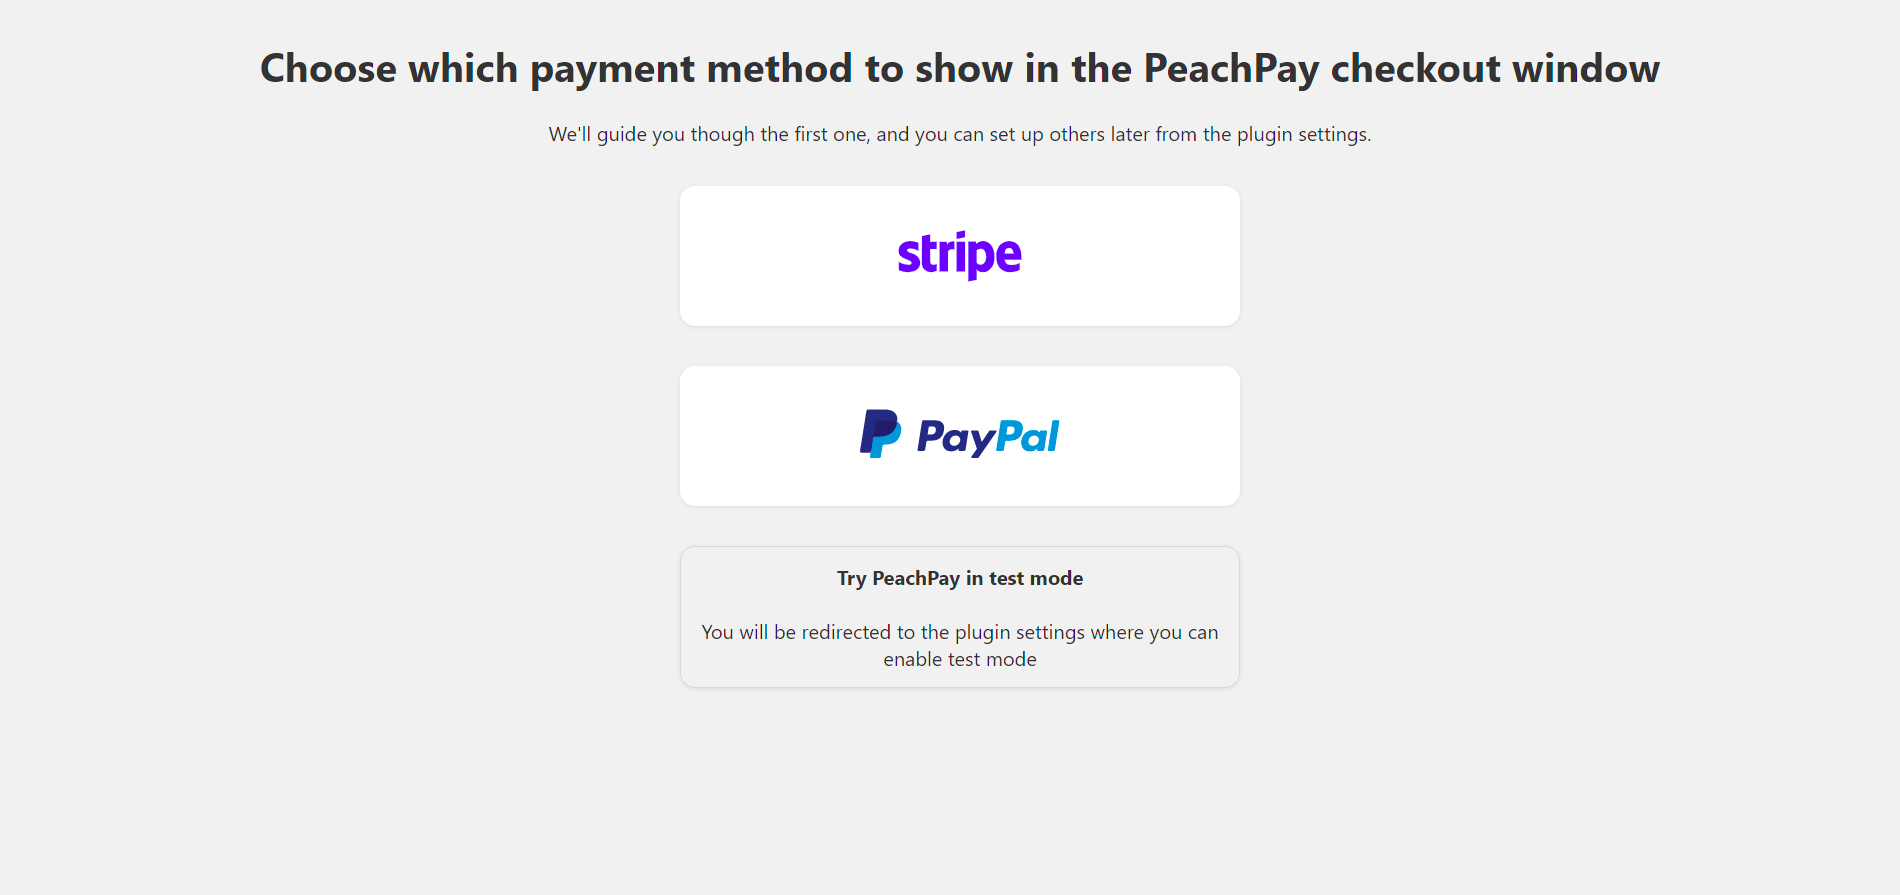 Choose which payment method to show in the PeachPay checkout window